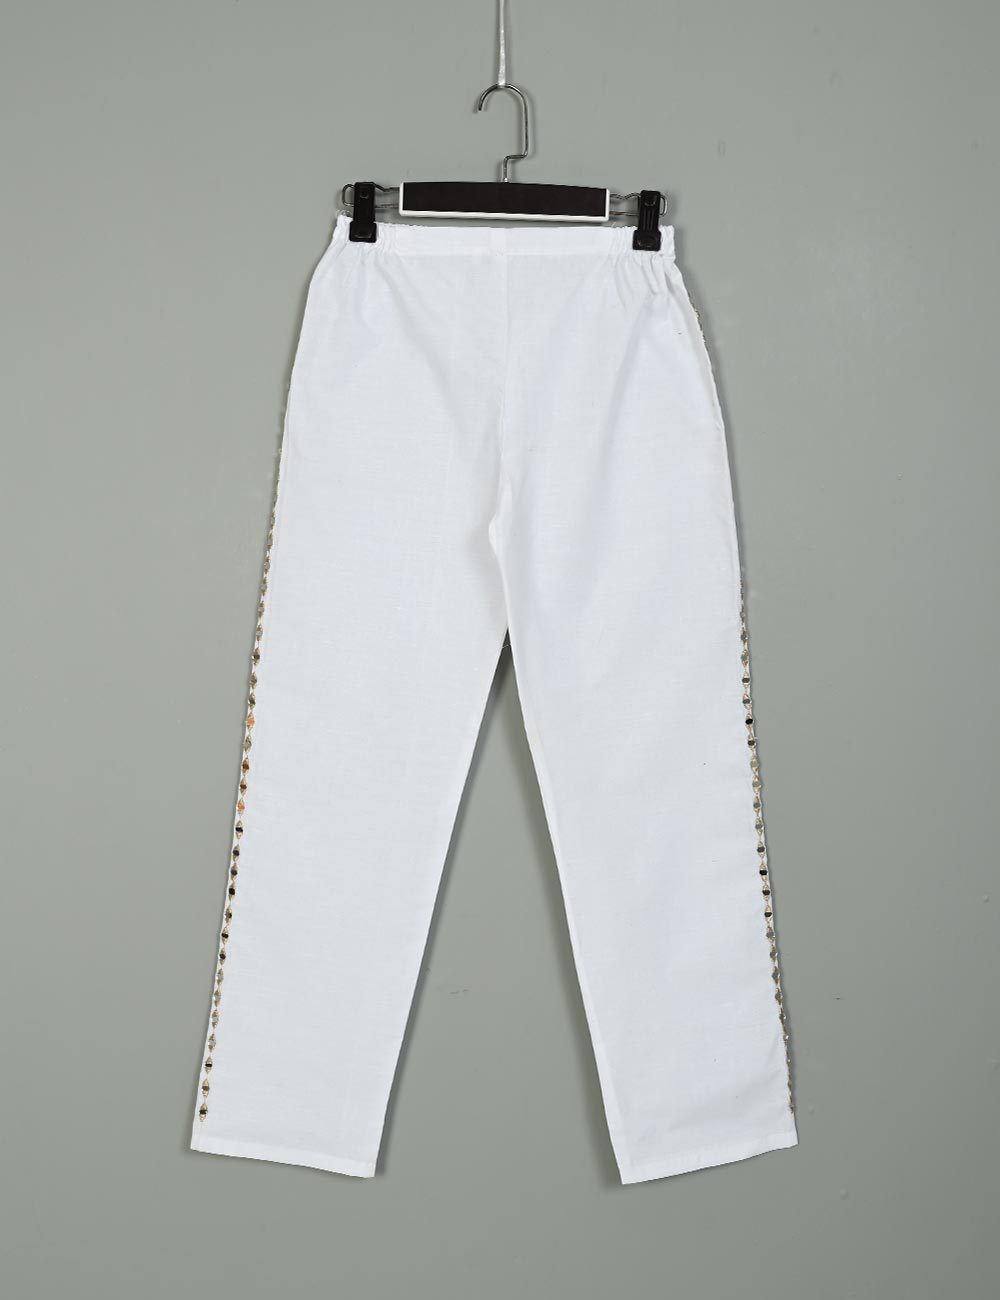 STC-14-White - Super Quality Polyester Cotton Trouser